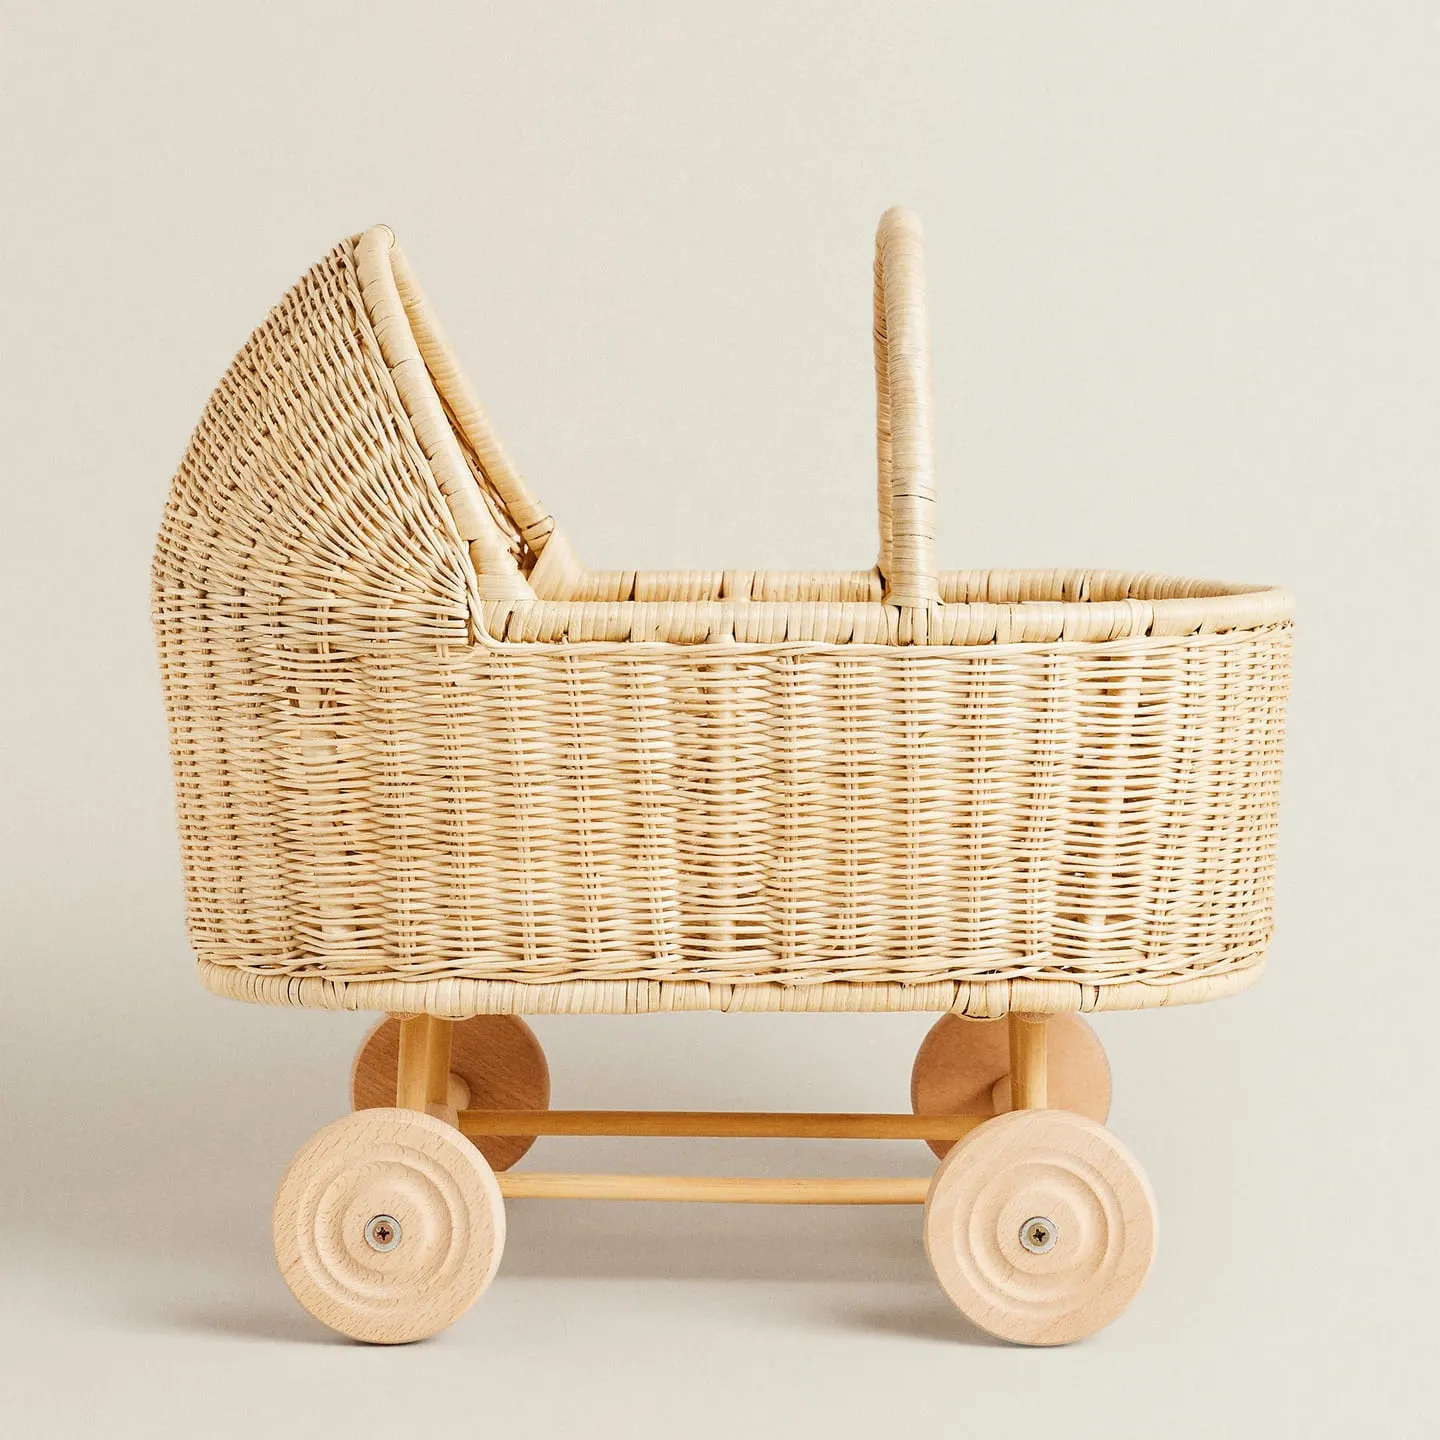 Crafted of high-quality Wicker Doll Pram home decor natural rattan trolley for toy baby doll Buggy Carriage Basket Rattan Doll